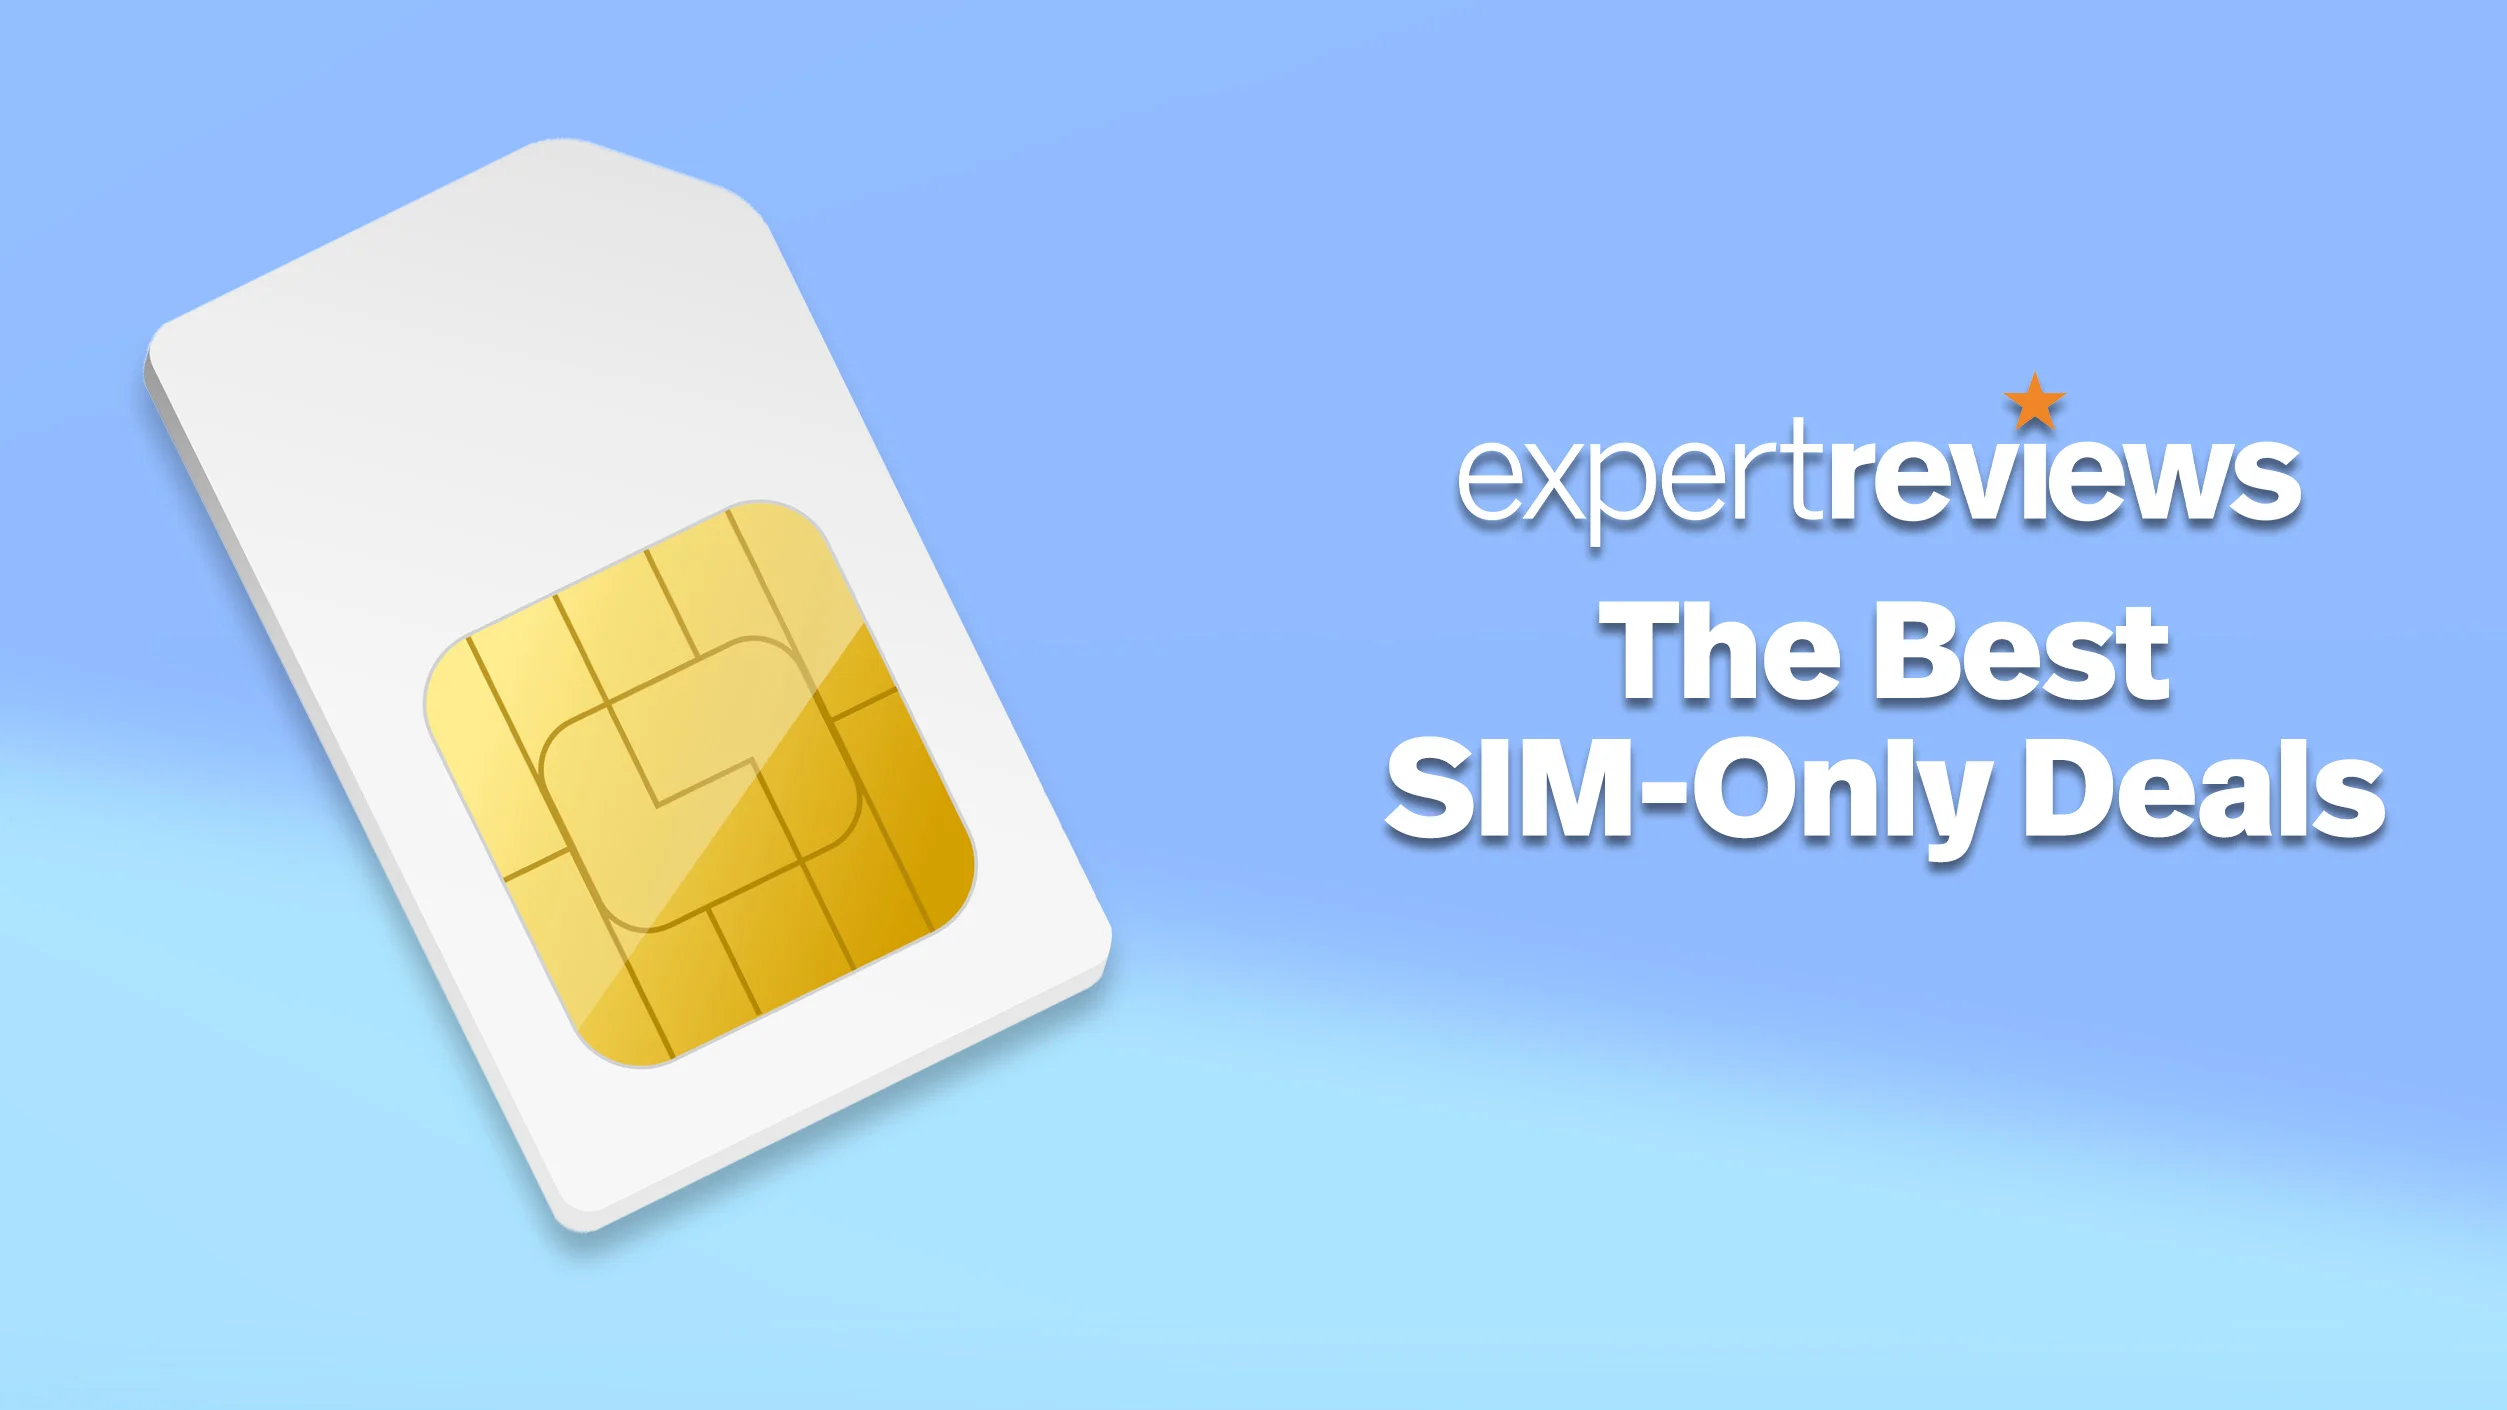 SIM-Only vs Contract: Which is Really Better for Your Wallet?